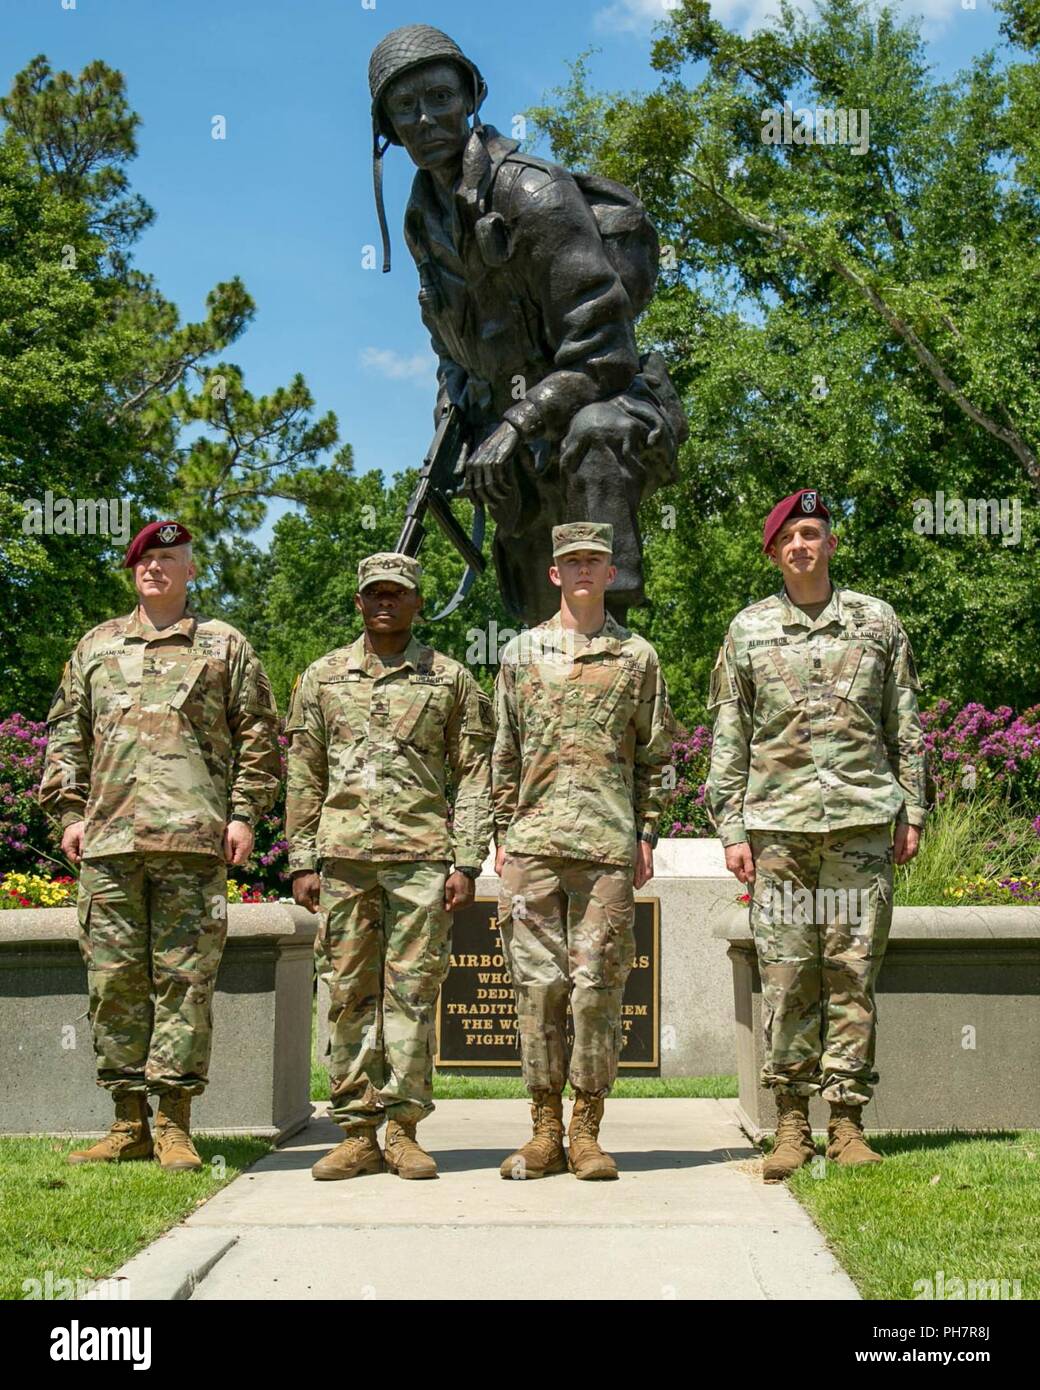 From left to right Lt. Gen. Paul J. LaCamera, Staff Sgt. Ifegwu Ifegwu, Pfc. Cadem J. Emmons, Command Sgt. Maj. Charles W. Albertson pose for a photo after Best Warrior Competition awards ceremony at Fort Bragg, North Carolina, June 29, 2018. The Best Warrior Competition is a weeklong event pushing participants to their physical and mental limits. Stock Photo